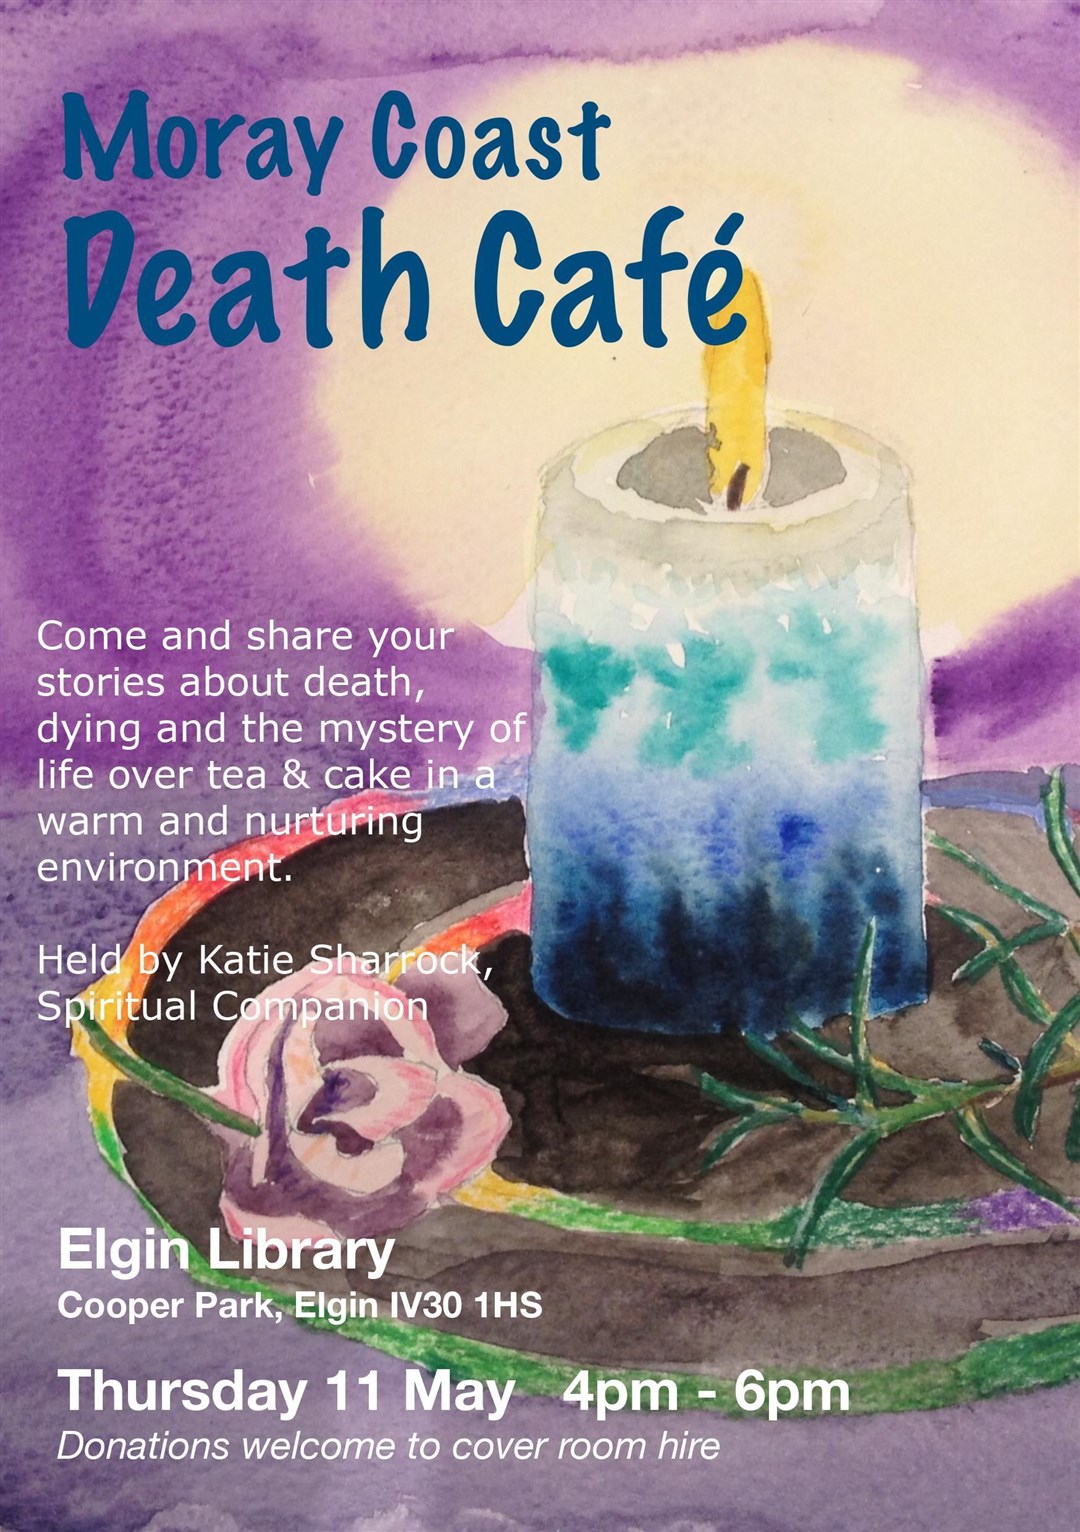 The Death Cafe is open to all.